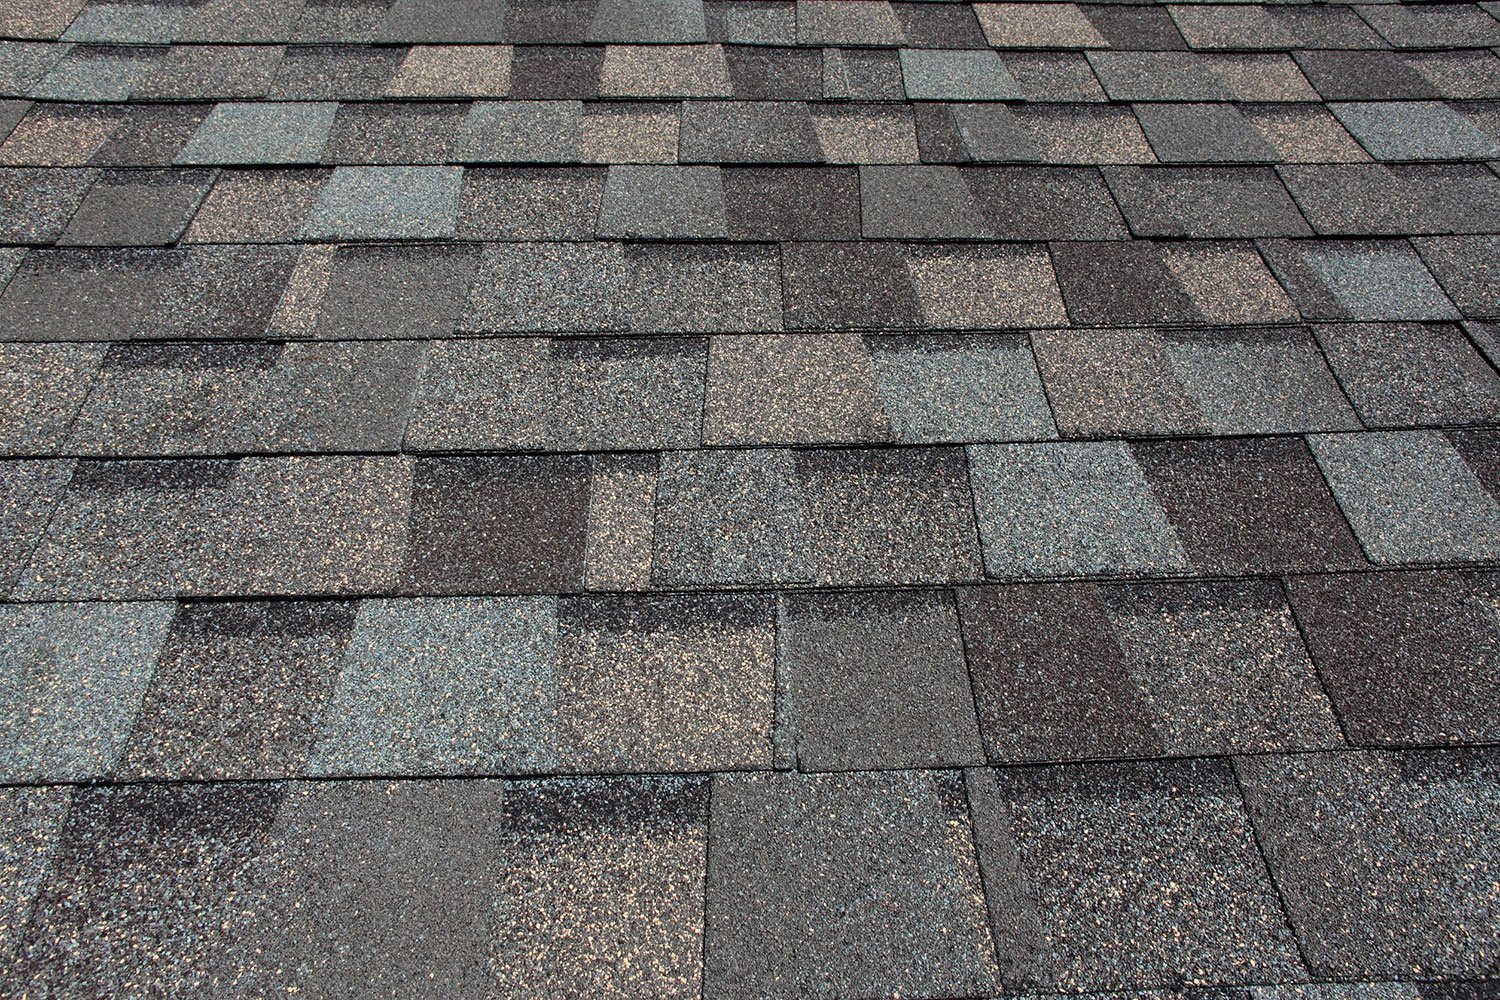 asphalt shingles are getting more expensive